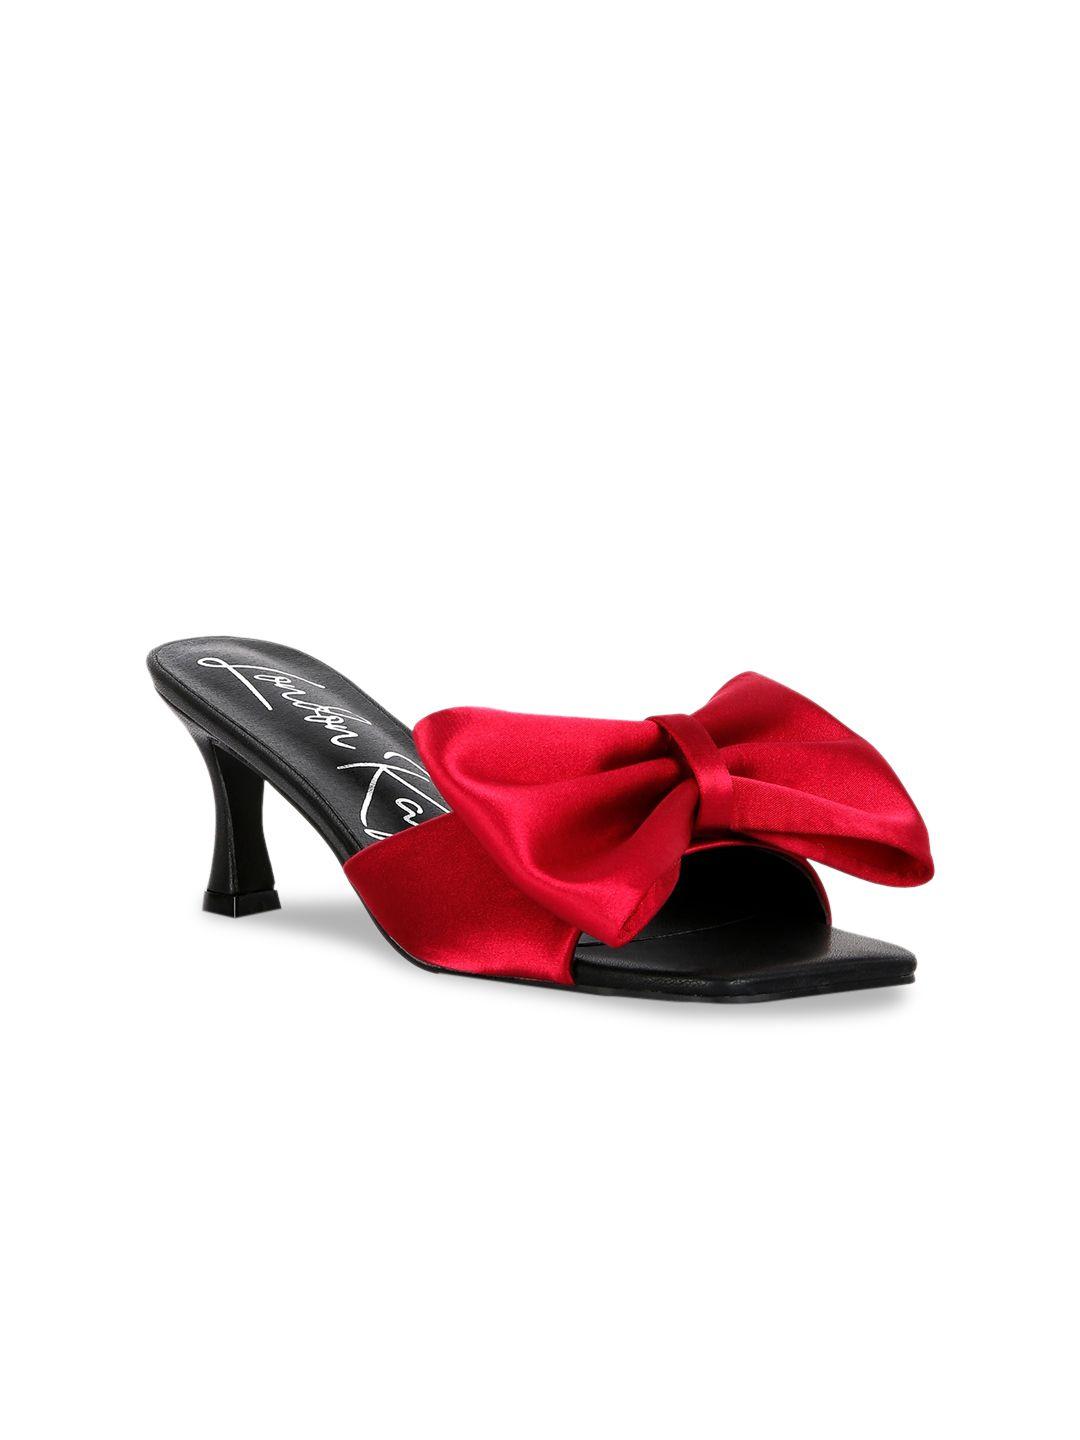 london rag red & black colourblocked party kitten peep toes heels with bows